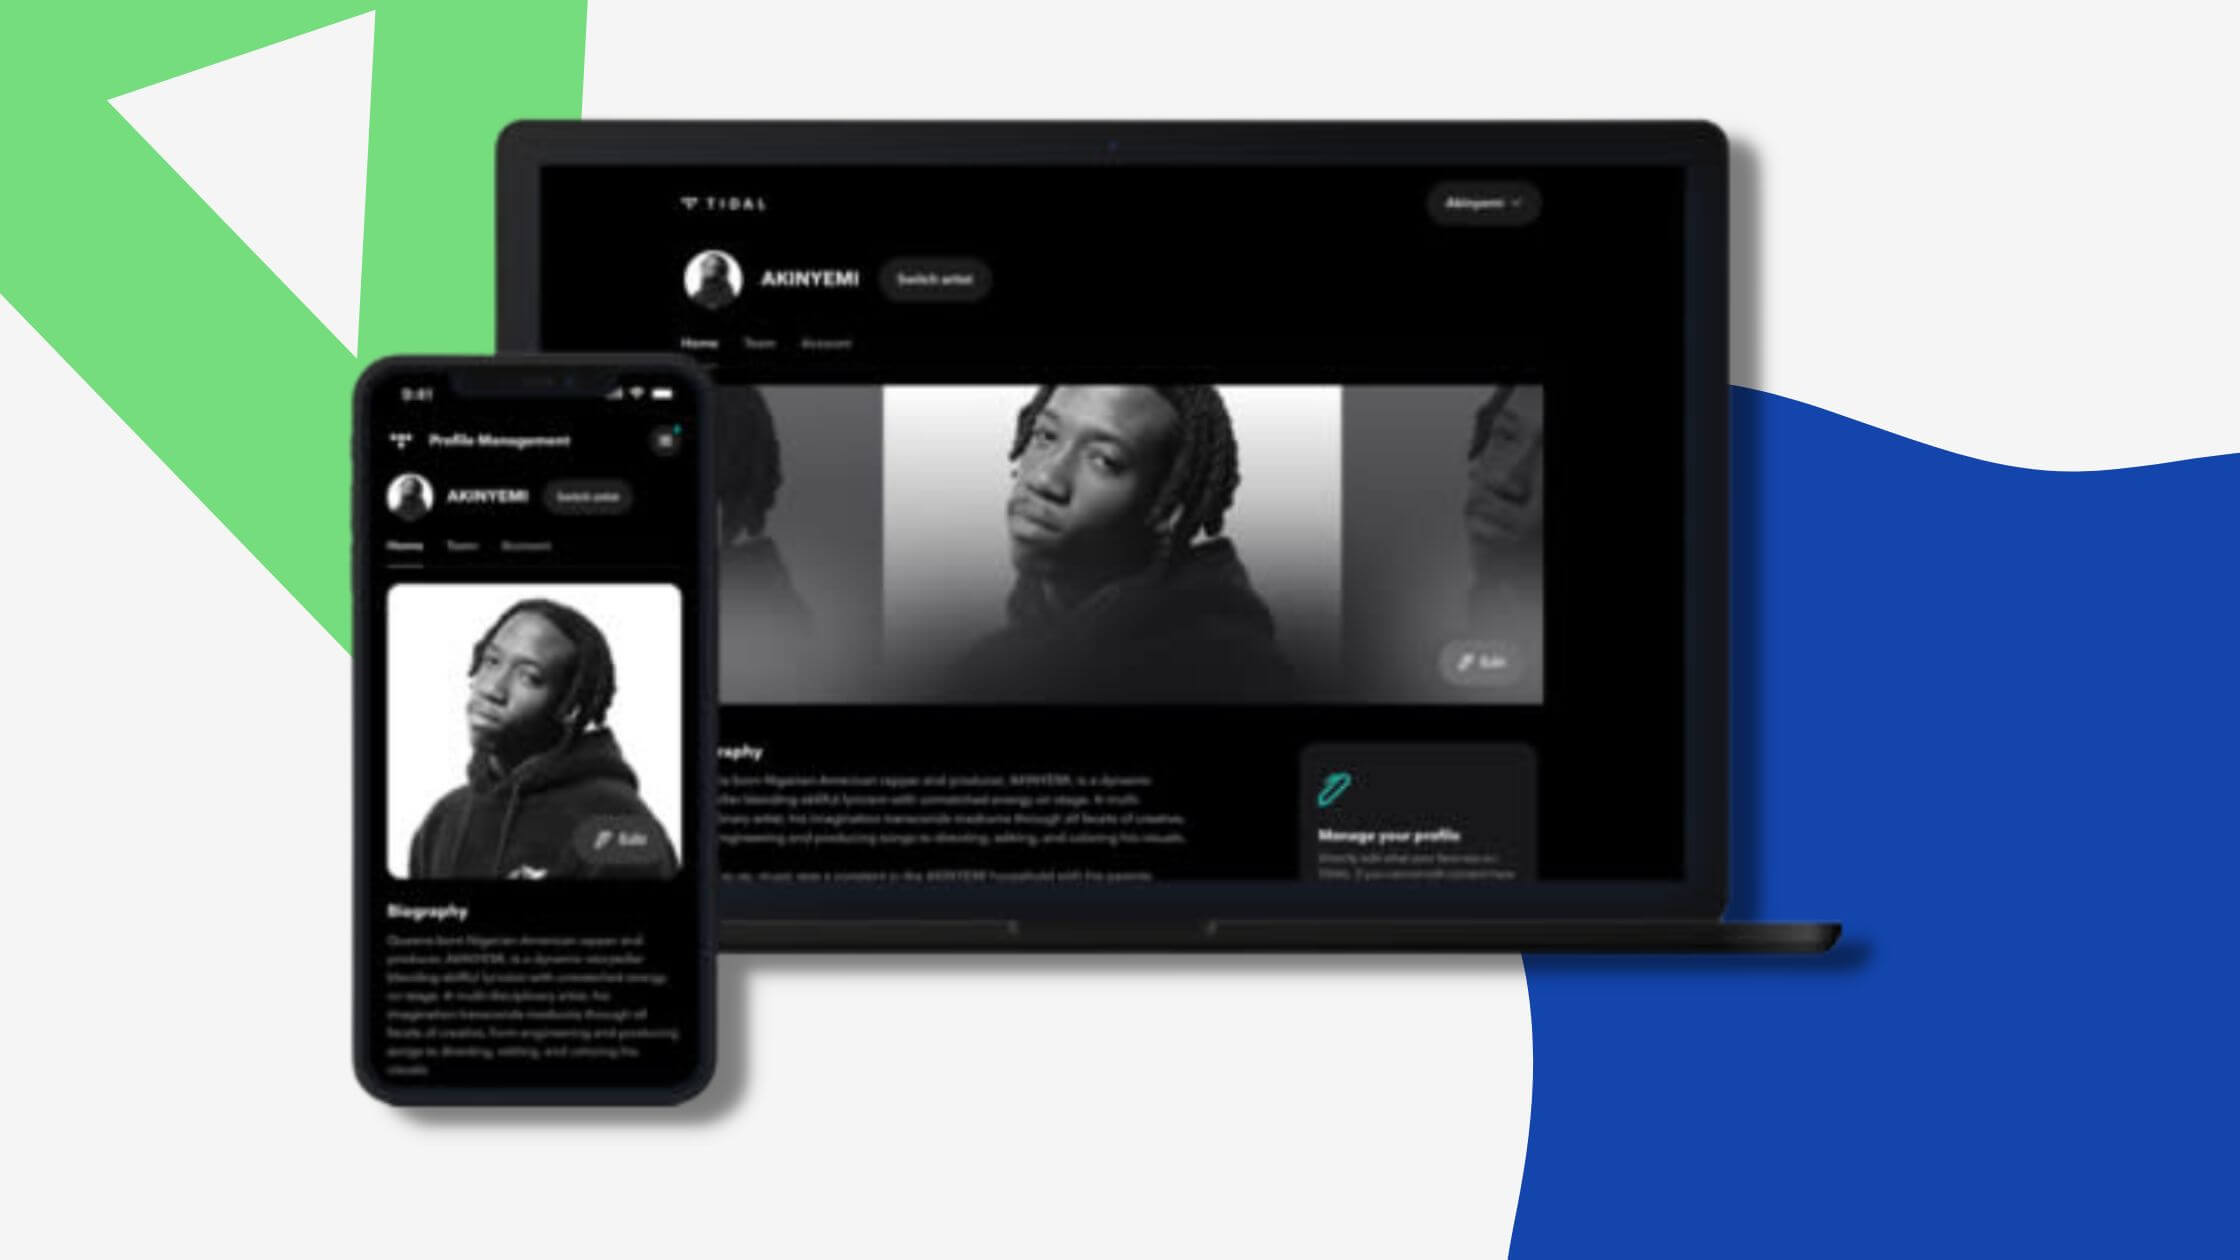 TIDAL Artist Home gives artists creative control over their profiles on TIDAL